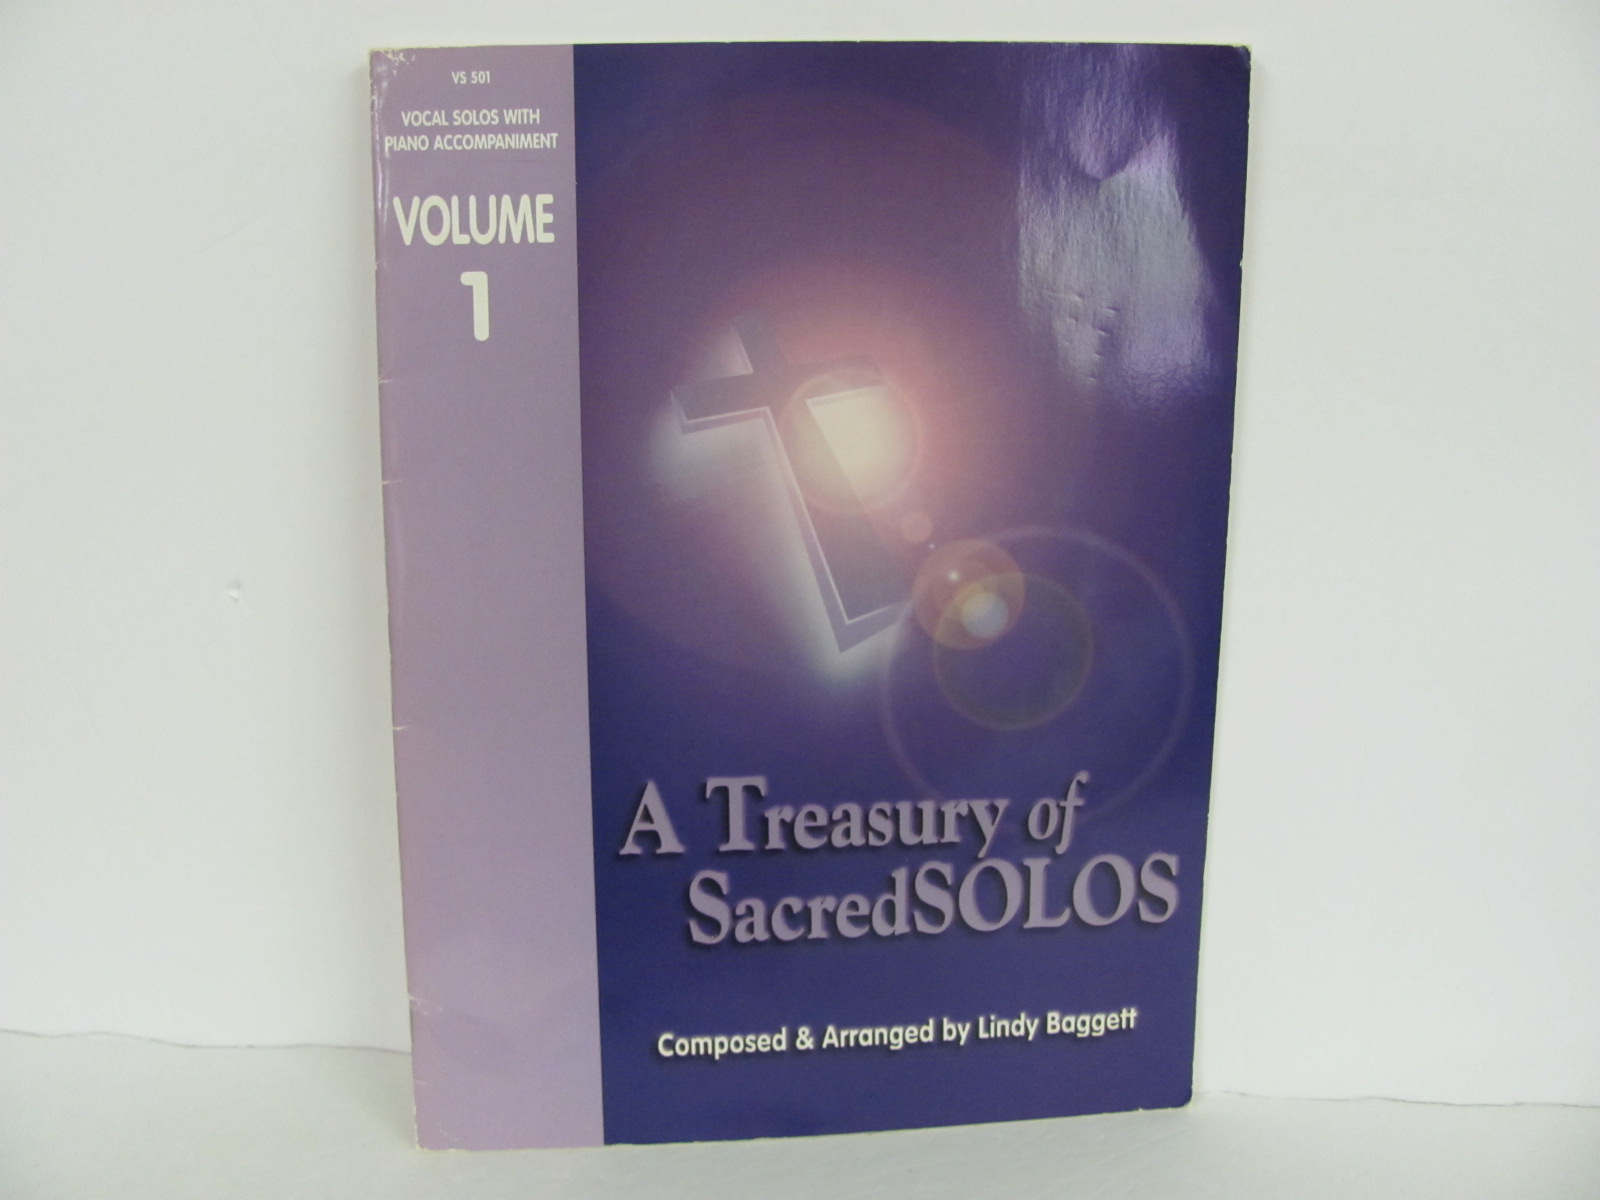 A-Treasury-of-Sacred-Solos-New-Song-Used-Volume-1-Music-Voice_343655A.jpg